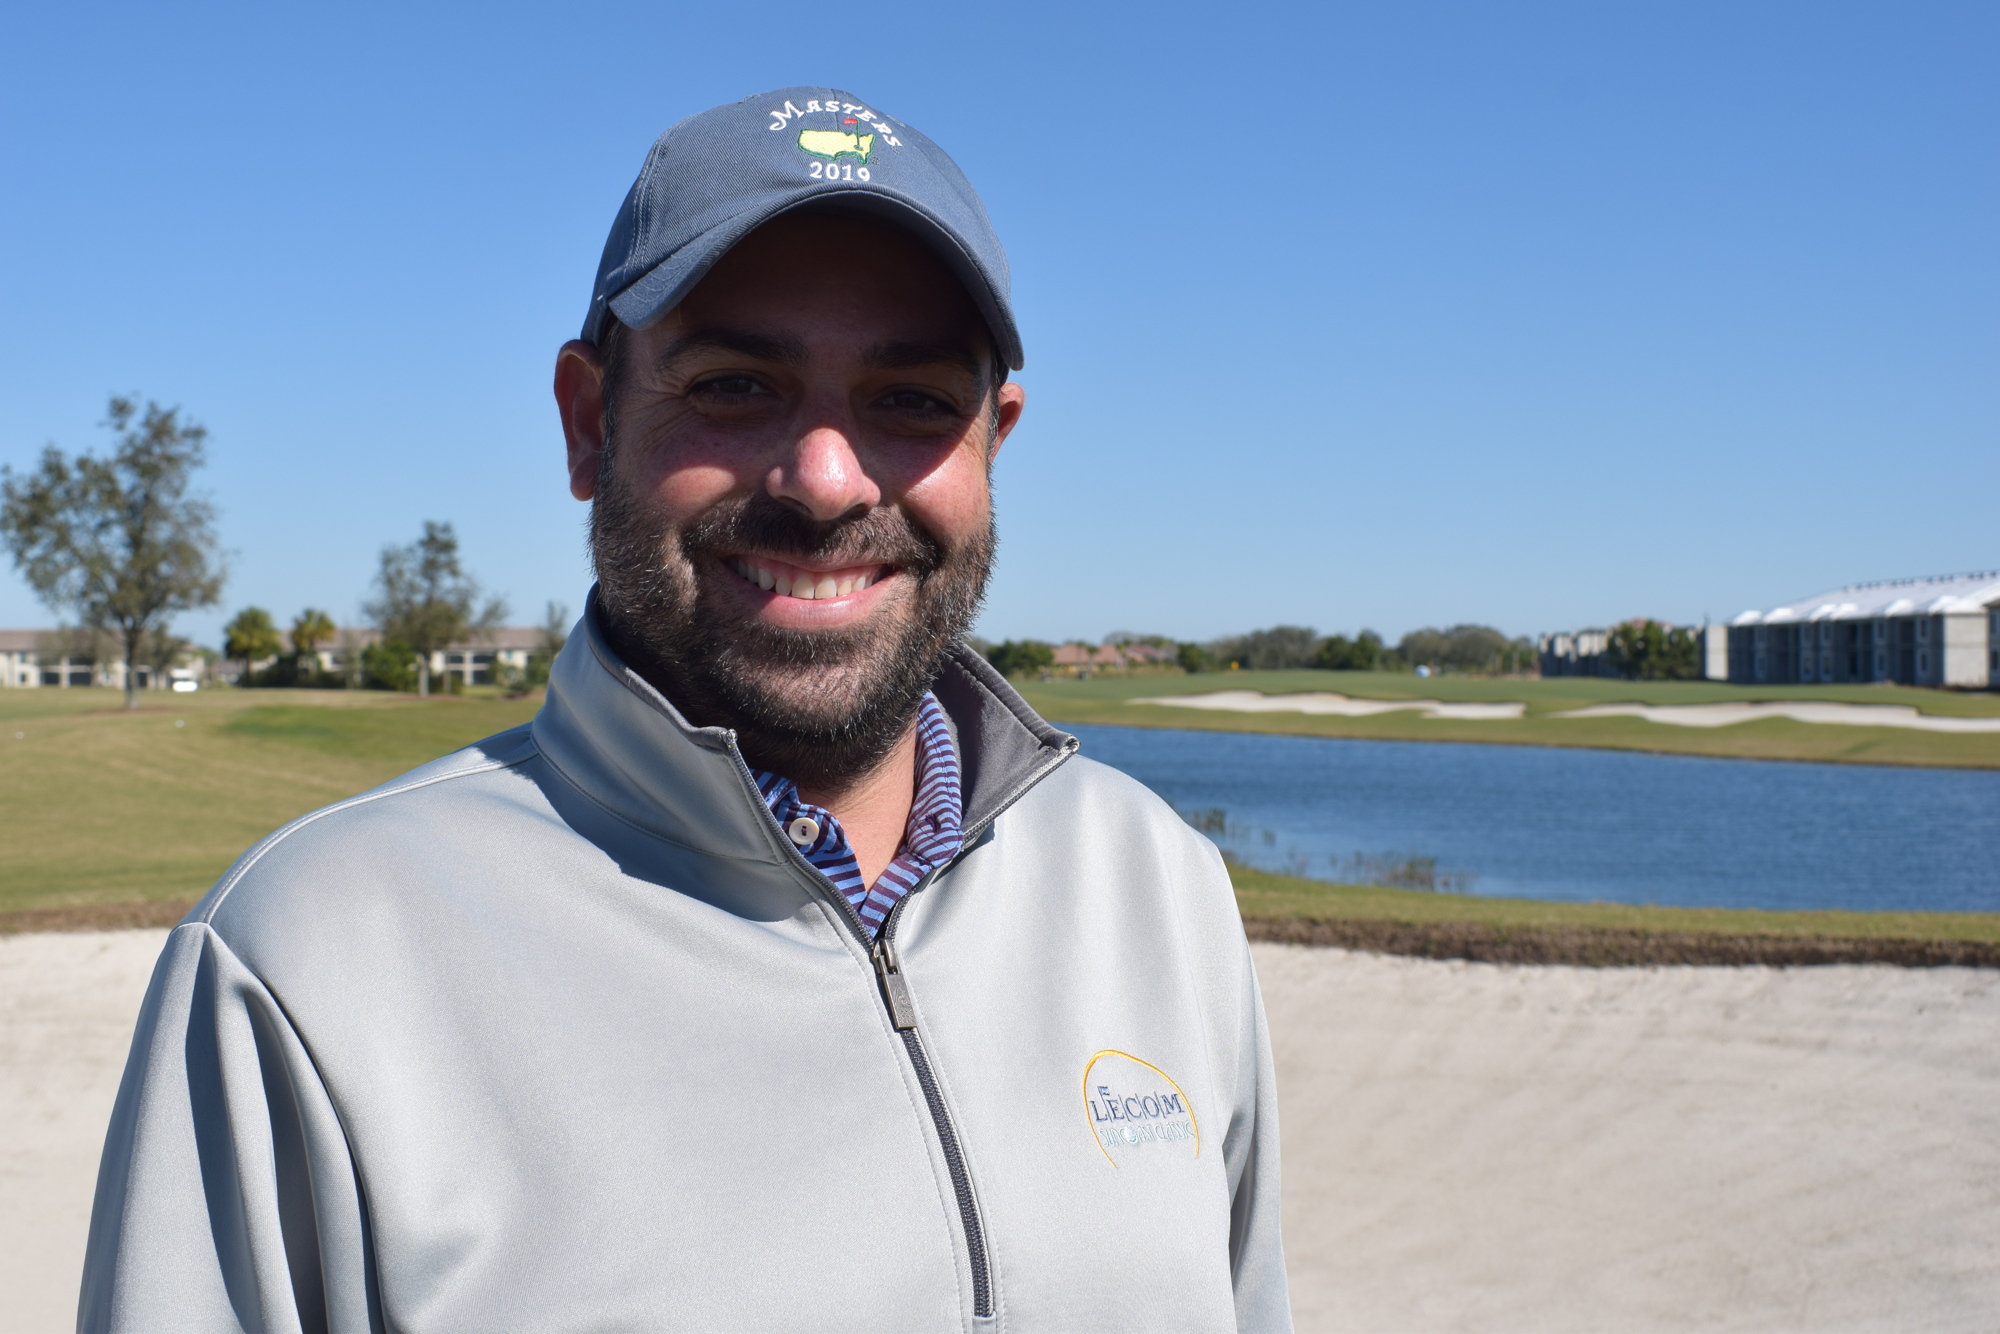 Justin Kristich, the Suncoast Classic tournament director, said fans will find conditions back to normal in 2022.